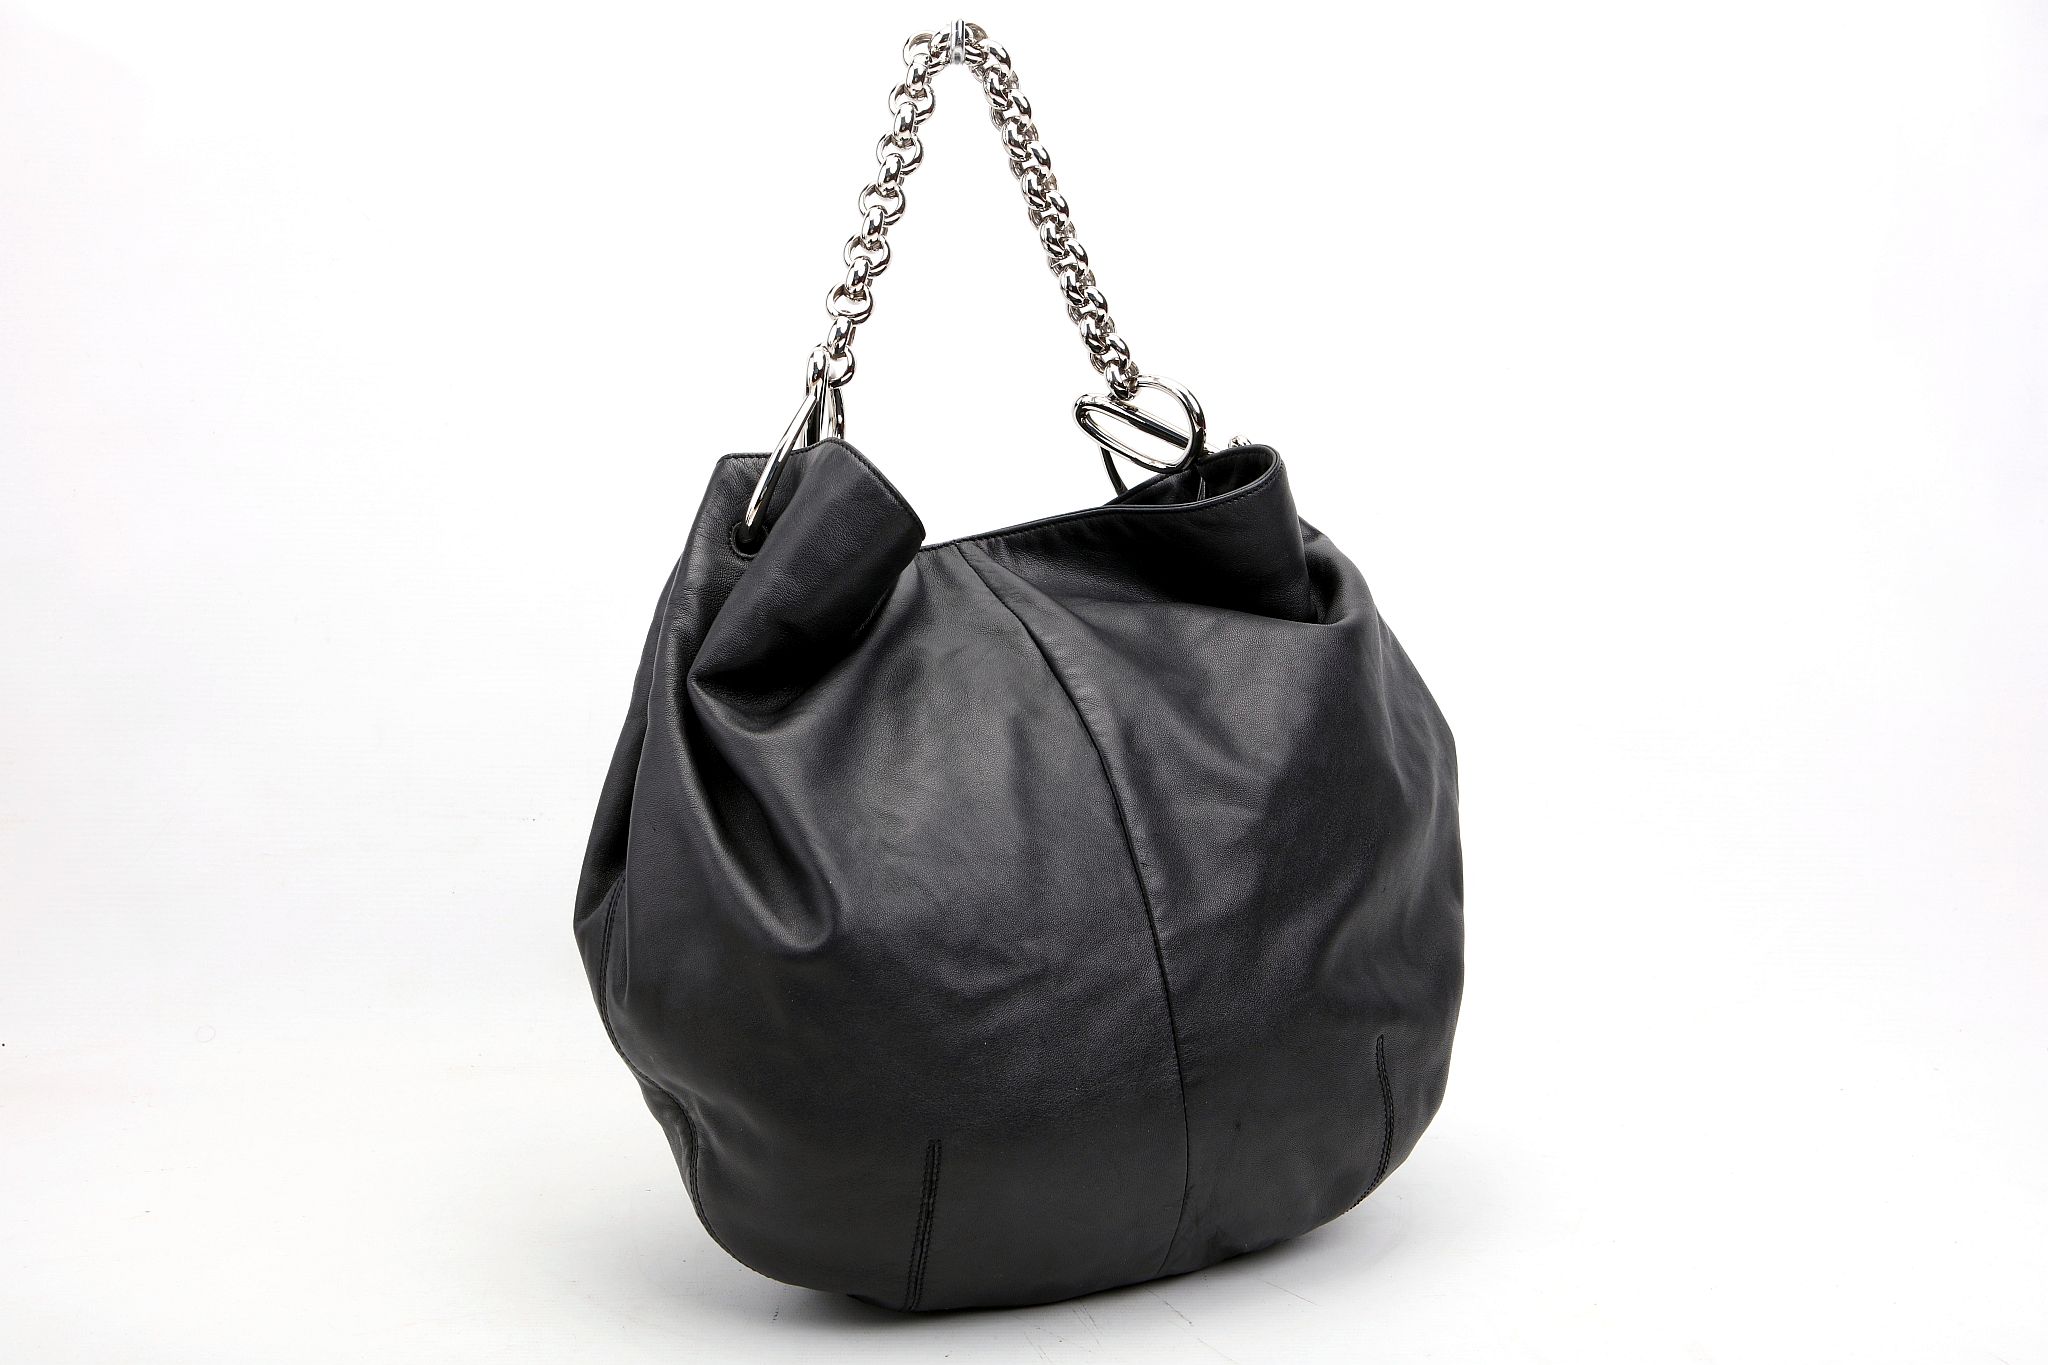 LOEWE HOBO HANDBAG, soft black leather with chunky silver tone strap, 42cm wide, 32cm high, with - Image 2 of 10